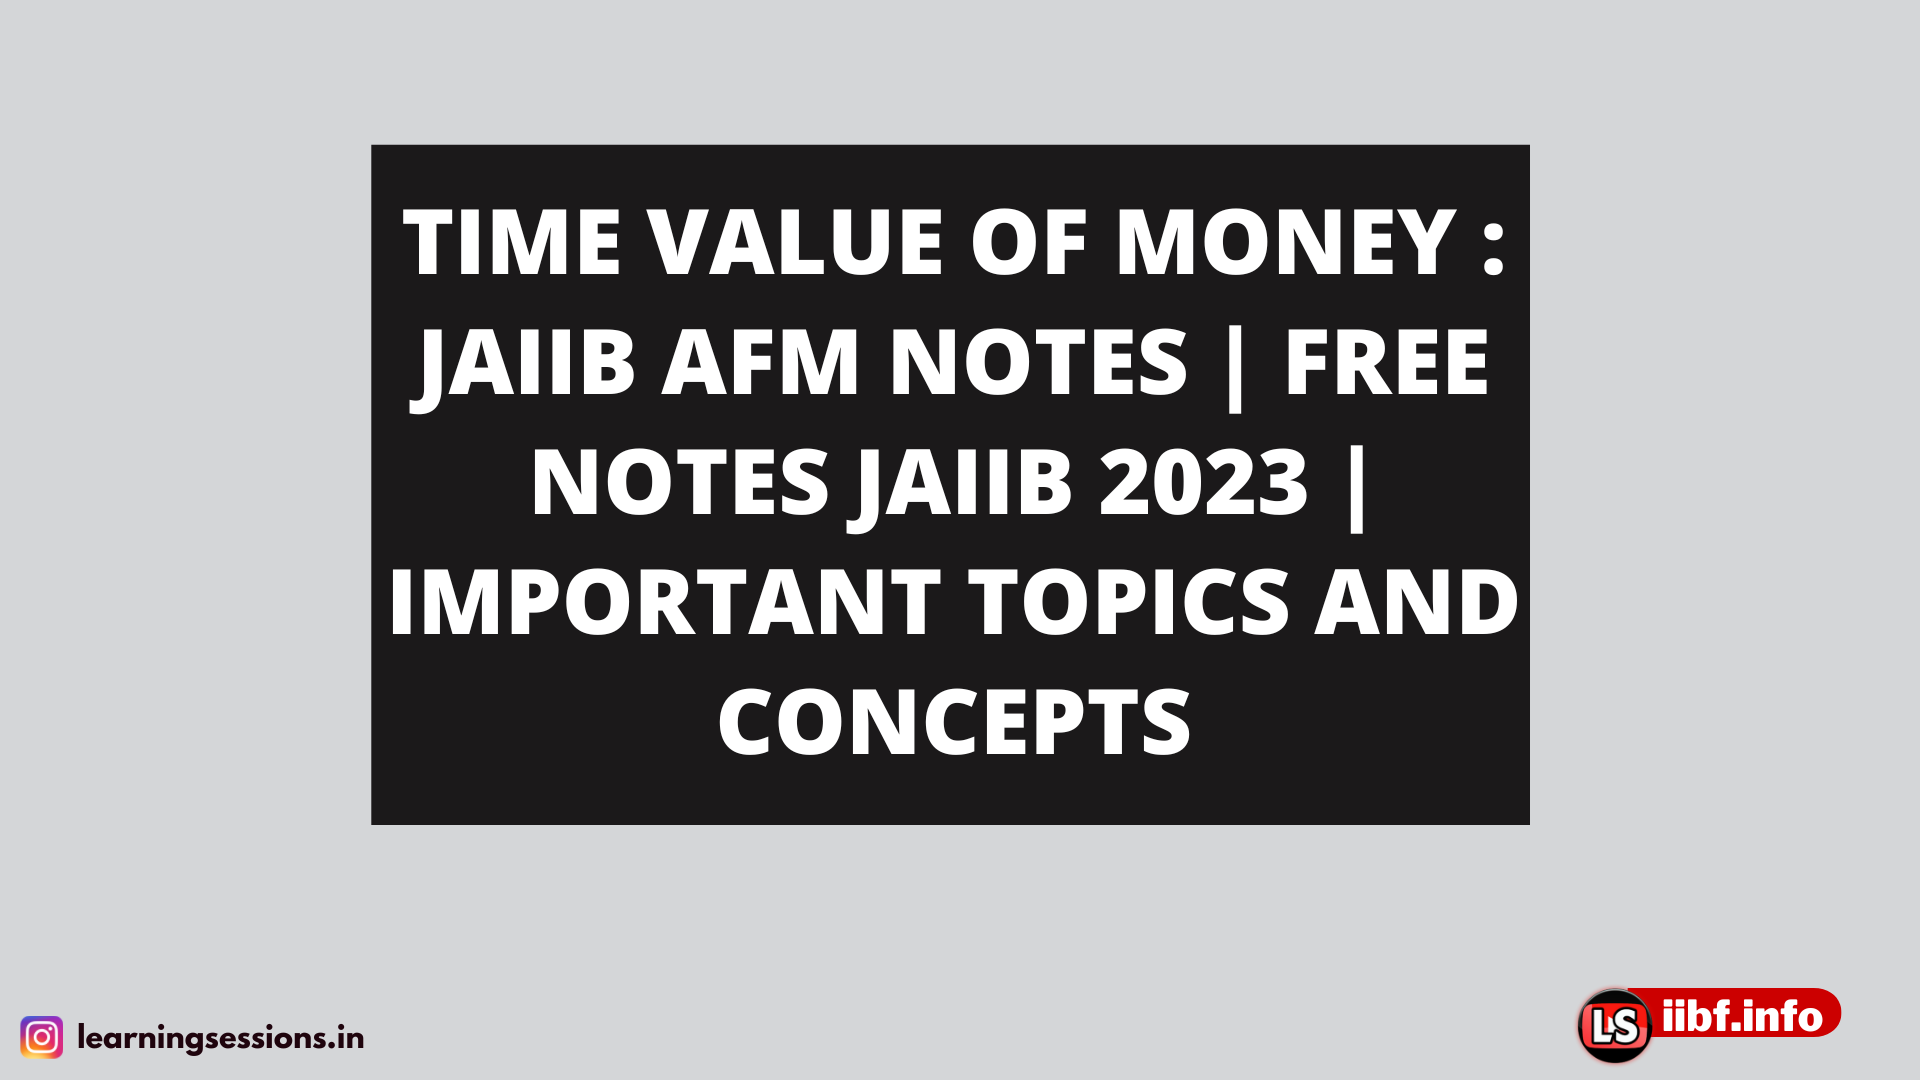 TIME VALUE OF MONEY : JAIIB AFM NOTES | FREE NOTES JAIIB 2023 | IMPORTANT TOPICS AND CONCEPTS